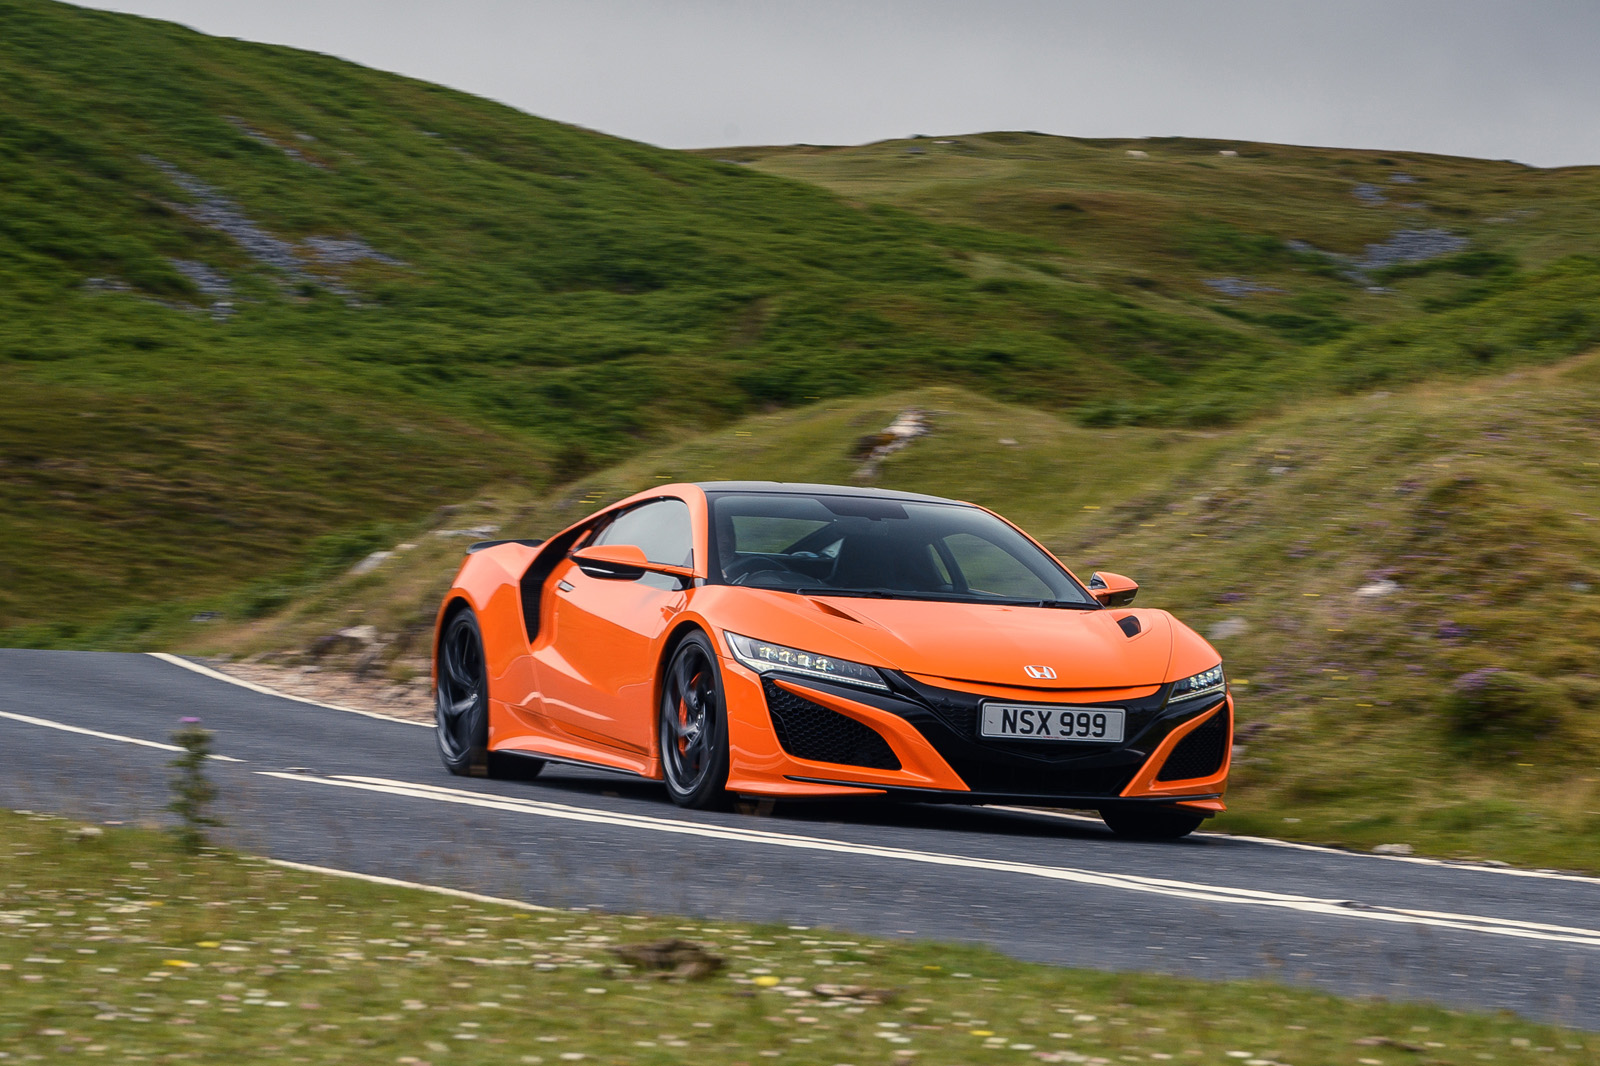 Fast But Flawed Why The Honda Nsx Won T Lead The Pack Autocar